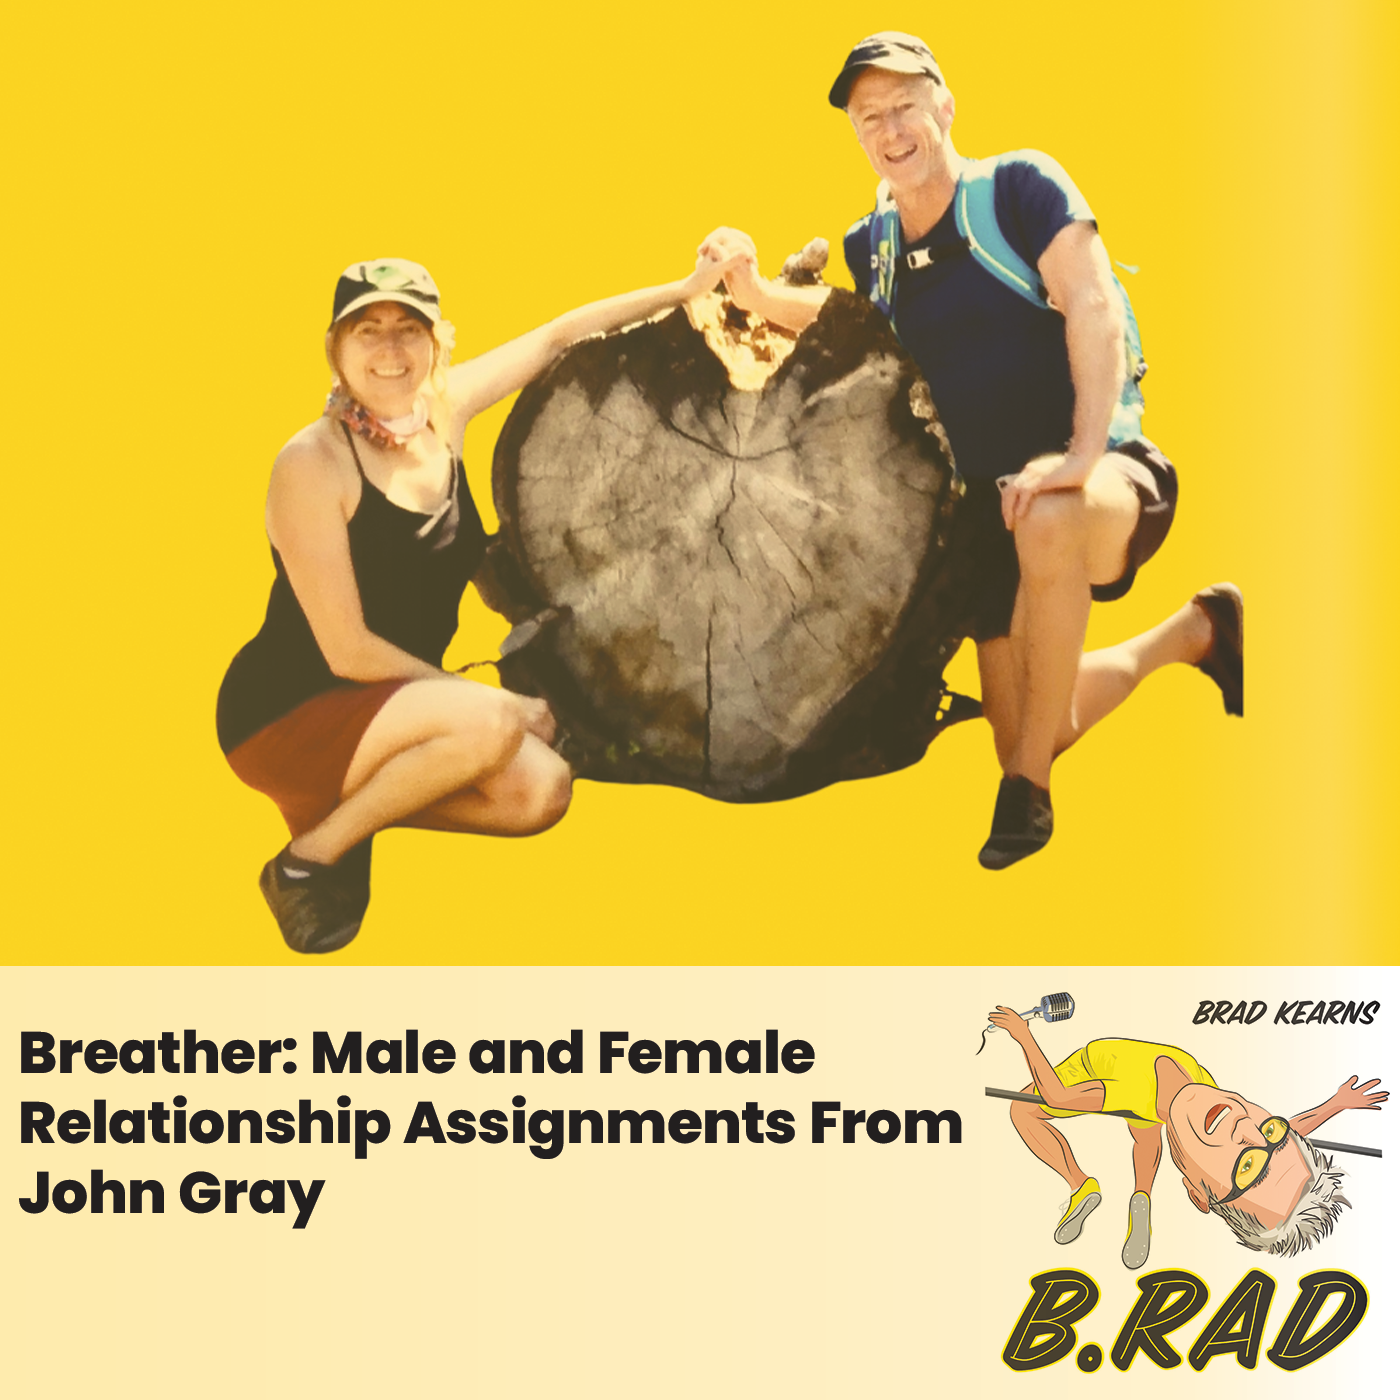 Breather: Male and Female Relationship Assignments From John Gray